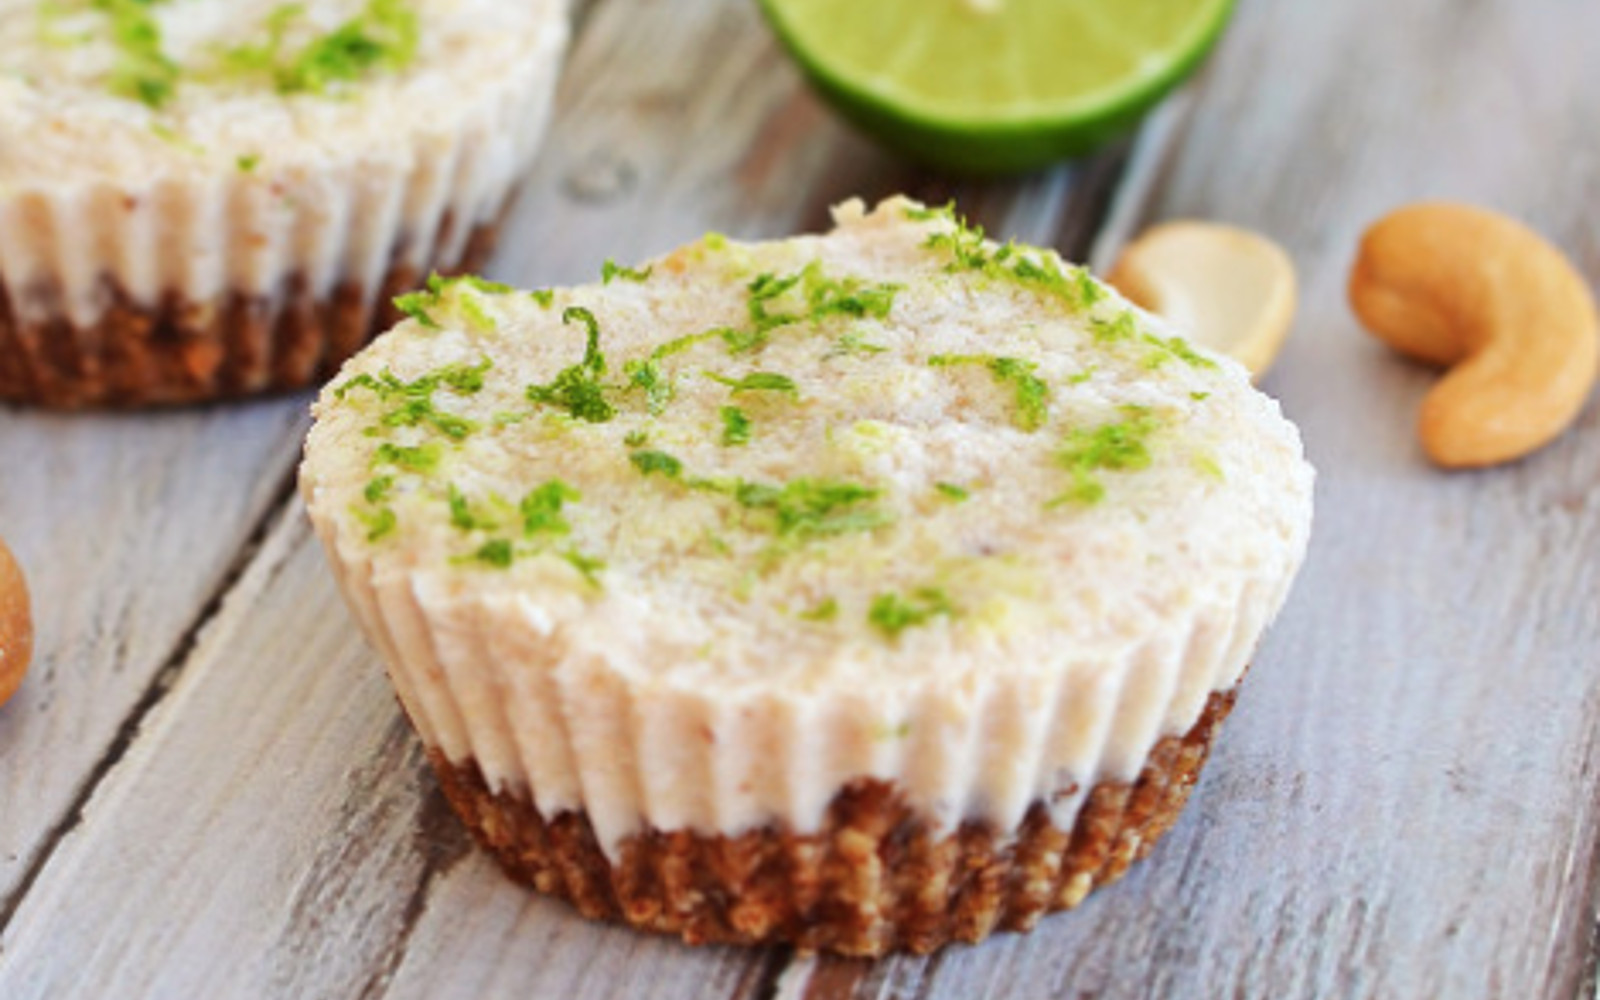 Vegan Gluten-Free Mini Key Lime Pies with lime zest topping